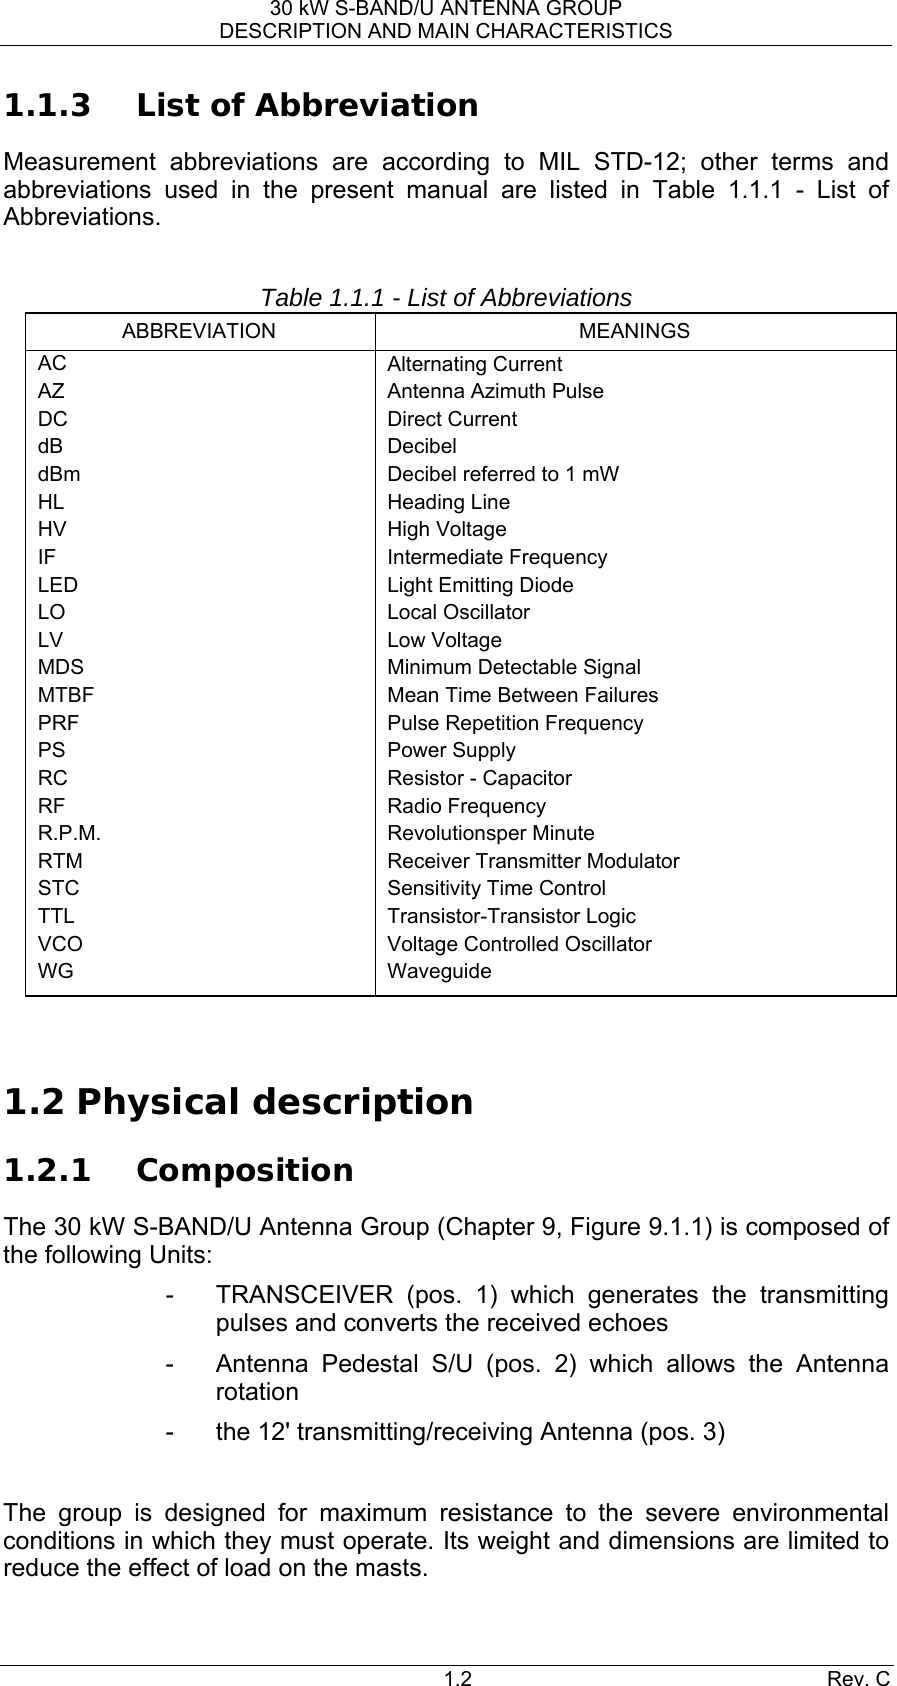 30 kW S-BAND/U ANTENNA GROUP DESCRIPTION AND MAIN CHARACTERISTICS 1.2 Rev. C 1.1.3 List of Abbreviation Measurement abbreviations are according to MIL STD-12; other terms and abbreviations used in the present manual are listed in Table 1.1.1 - List of Abbreviations.  Table 1.1.1 - List of Abbreviations ABBREVIATION MEANINGS AC AZ DC dB dBm HL HV IF LED LO LV MDS MTBF PRF PS RC RF R.P.M. RTM STC TTL VCO WG Alternating Current Antenna Azimuth Pulse Direct Current Decibel Decibel referred to 1 mW Heading Line High Voltage Intermediate Frequency Light Emitting Diode Local Oscillator Low Voltage Minimum Detectable Signal Mean Time Between Failures Pulse Repetition Frequency Power Supply Resistor - Capacitor Radio Frequency Revolutionsper Minute Receiver Transmitter Modulator Sensitivity Time Control Transistor-Transistor Logic Voltage Controlled Oscillator Waveguide     1.2 Physical description 1.2.1 Composition The 30 kW S-BAND/U Antenna Group (Chapter 9, Figure 9.1.1) is composed of the following Units: -  TRANSCEIVER (pos. 1) which generates the transmitting pulses and converts the received echoes -  Antenna Pedestal S/U (pos. 2) which allows the Antenna rotation -  the 12&apos; transmitting/receiving Antenna (pos. 3)  The group is designed for maximum resistance to the severe environmental conditions in which they must operate. Its weight and dimensions are limited to reduce the effect of load on the masts. 